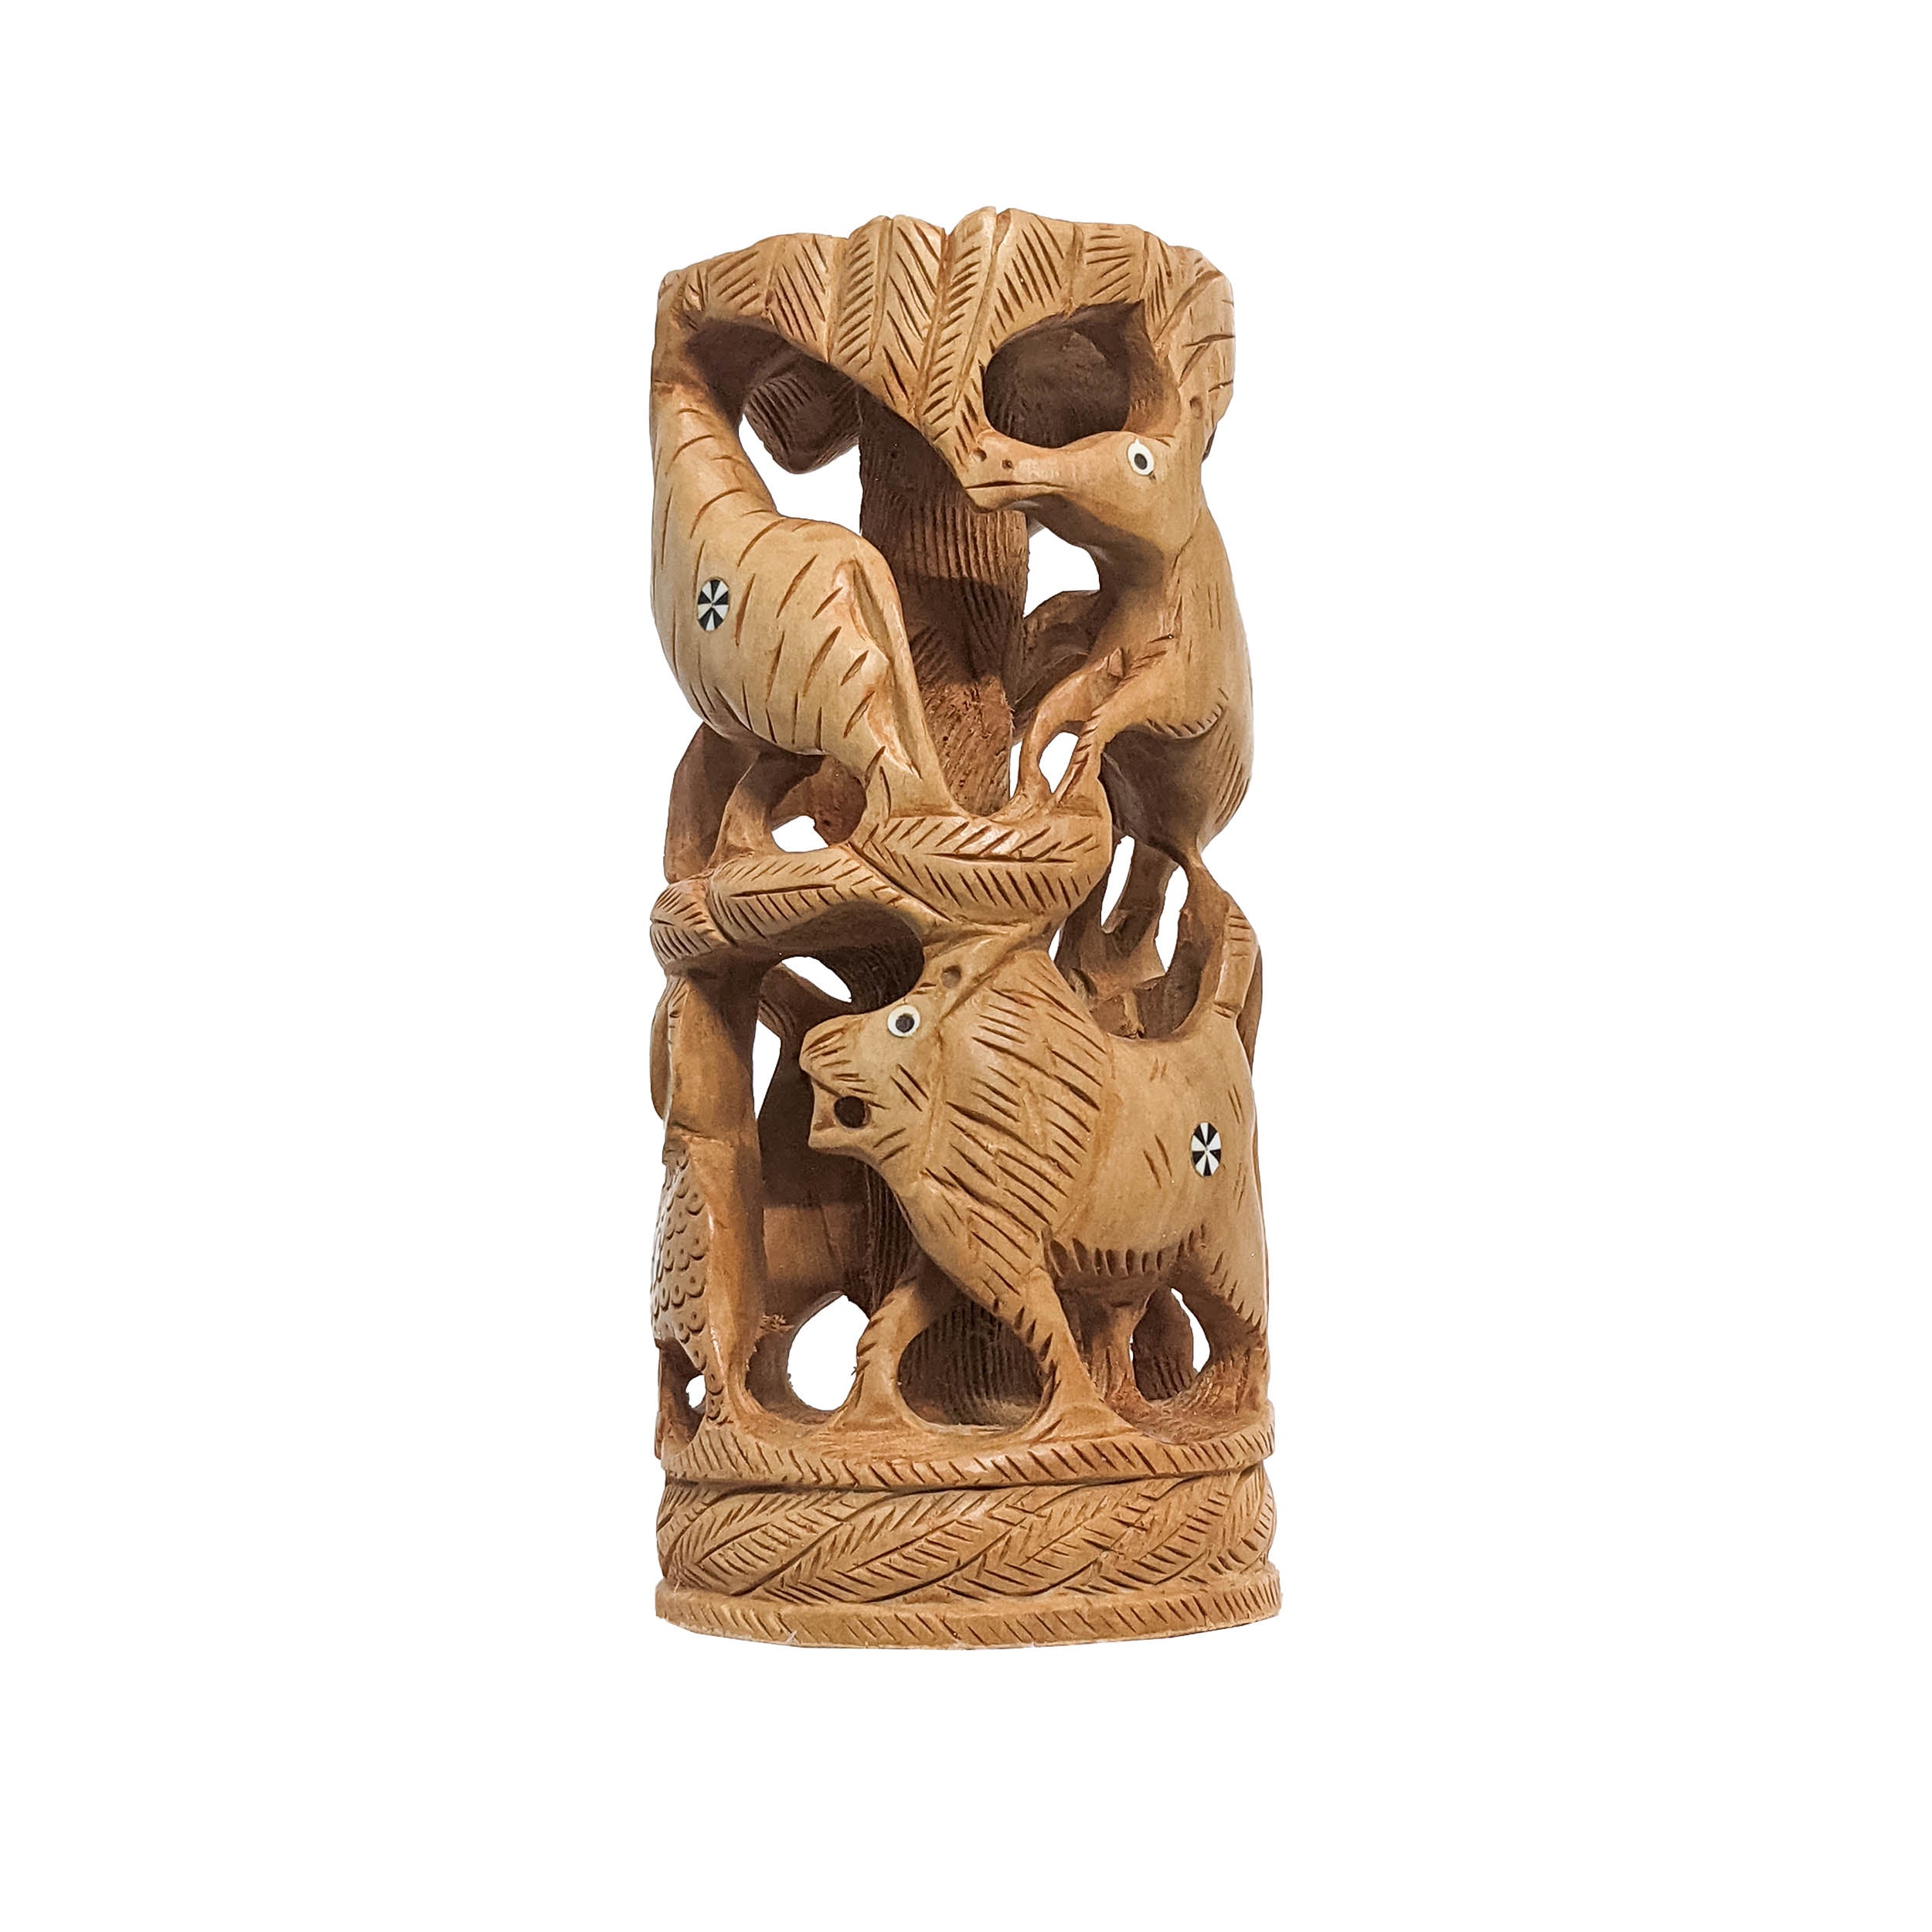 Add Charm to Your Home with Handcrafted Wooden Animal Mix Statue